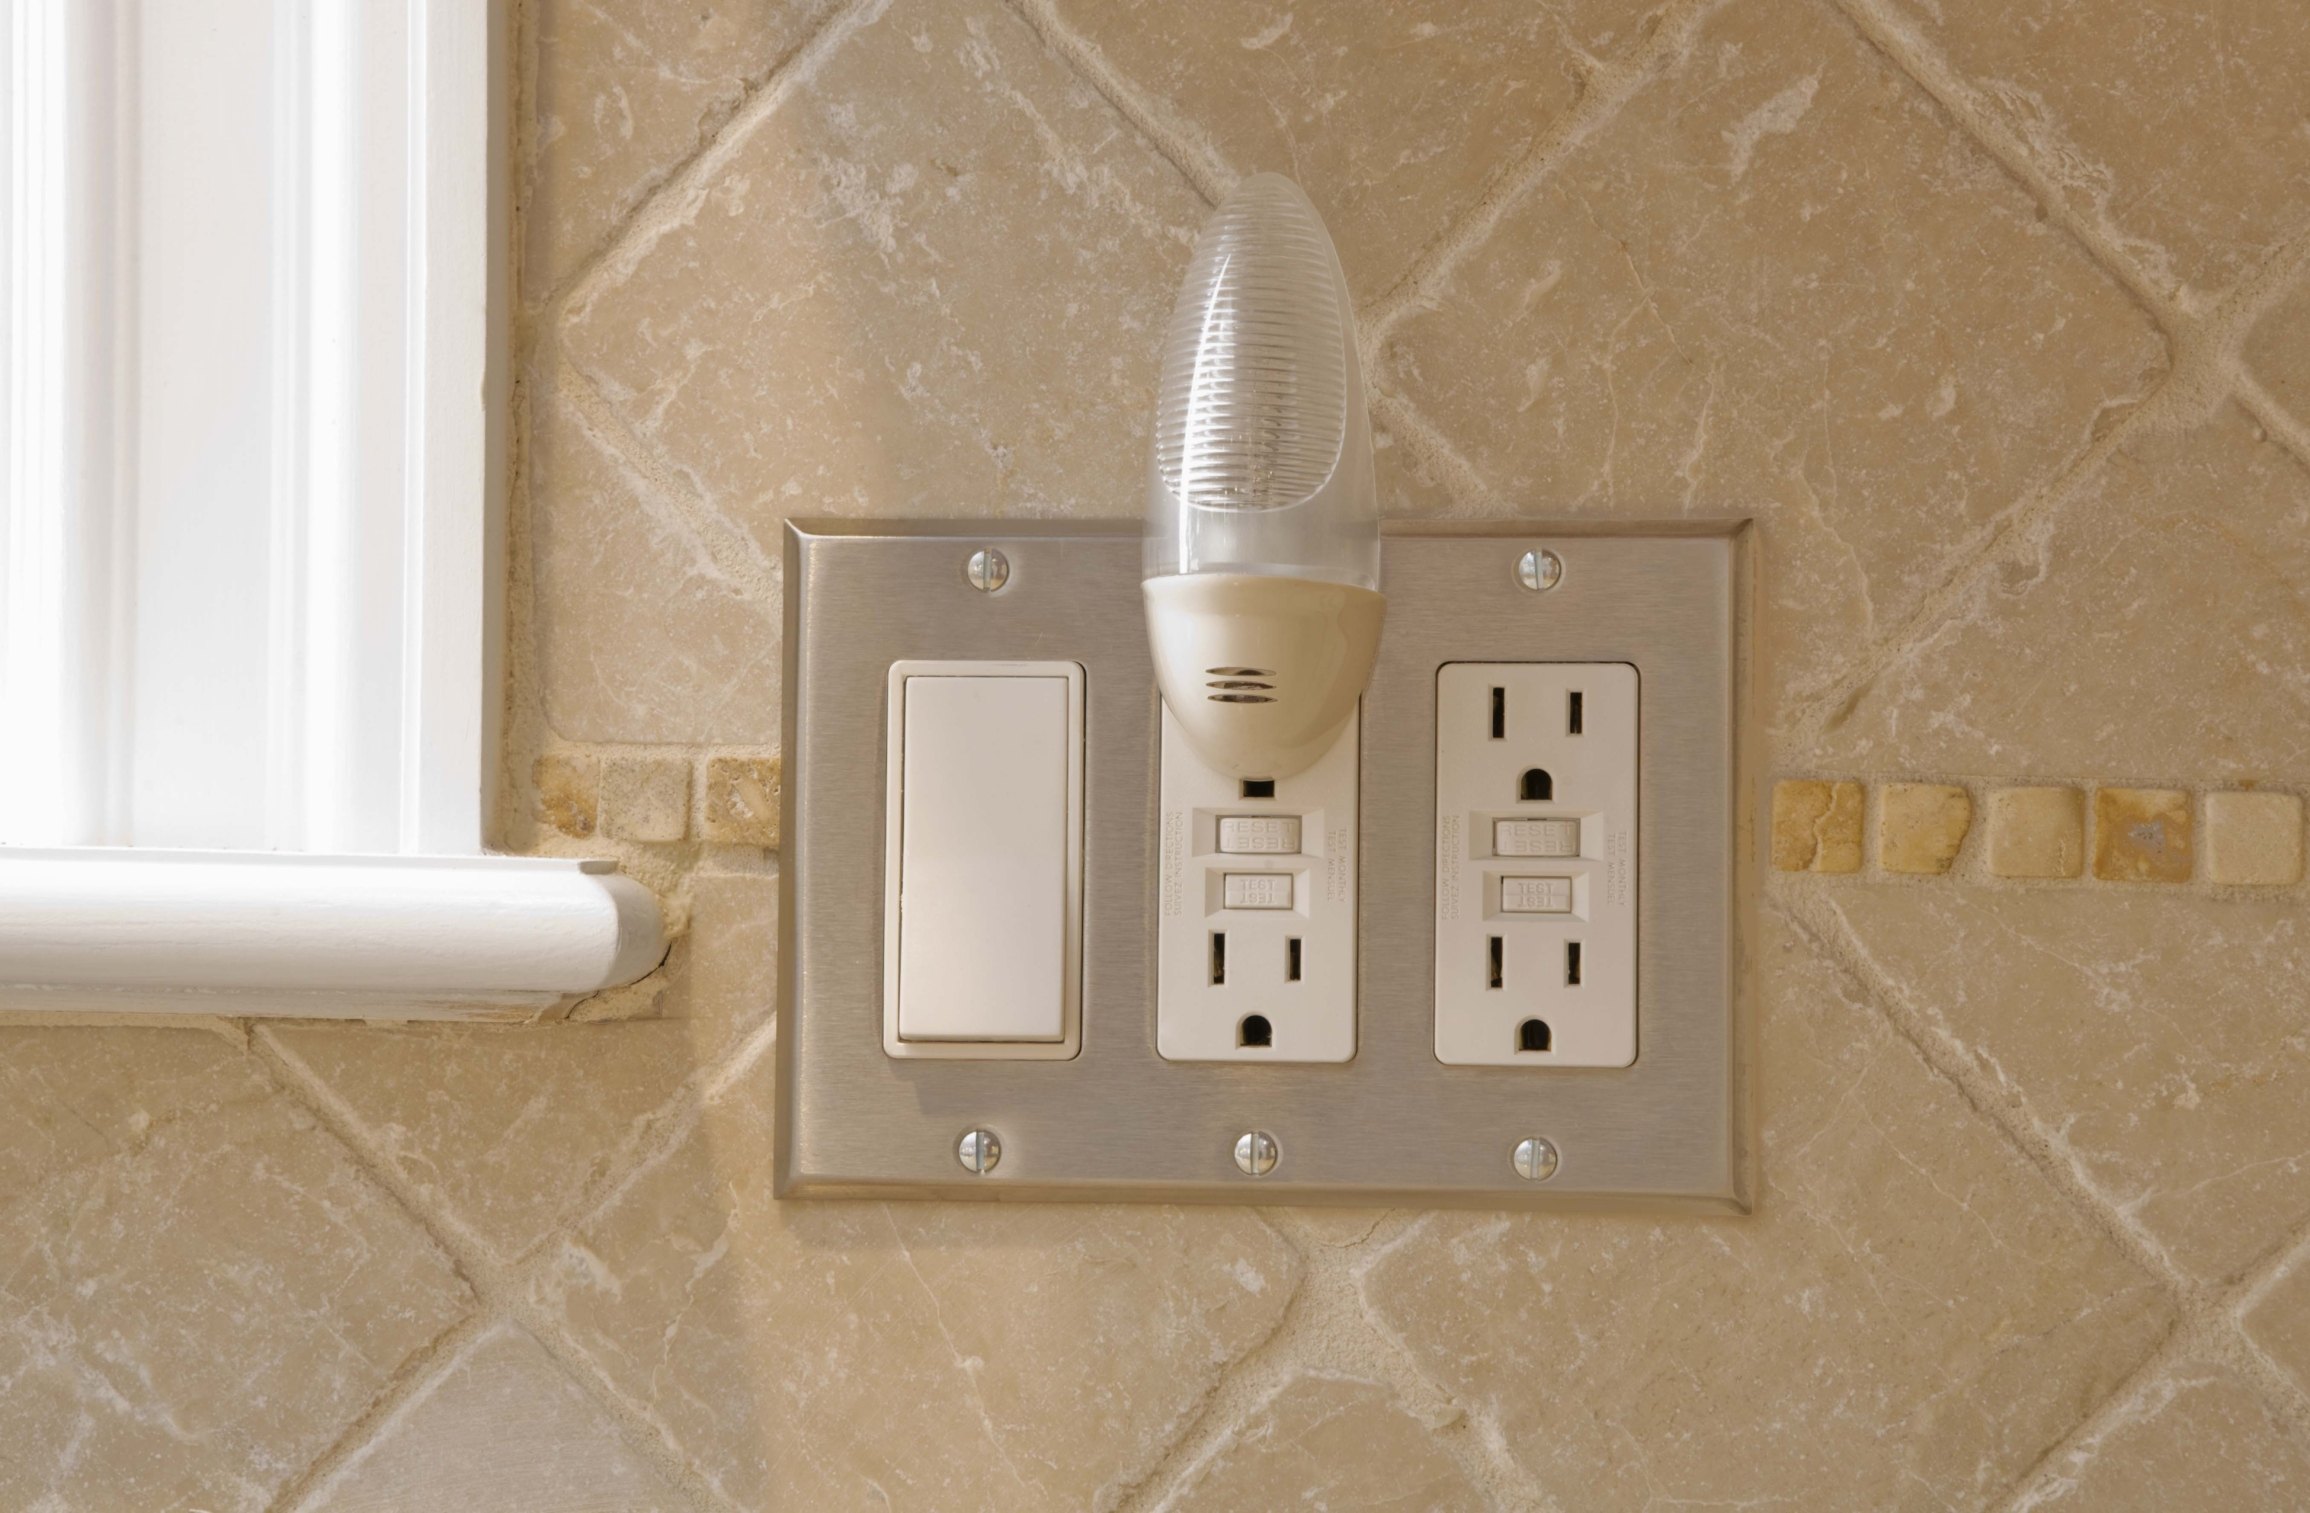 kitchen wall outlets stop working